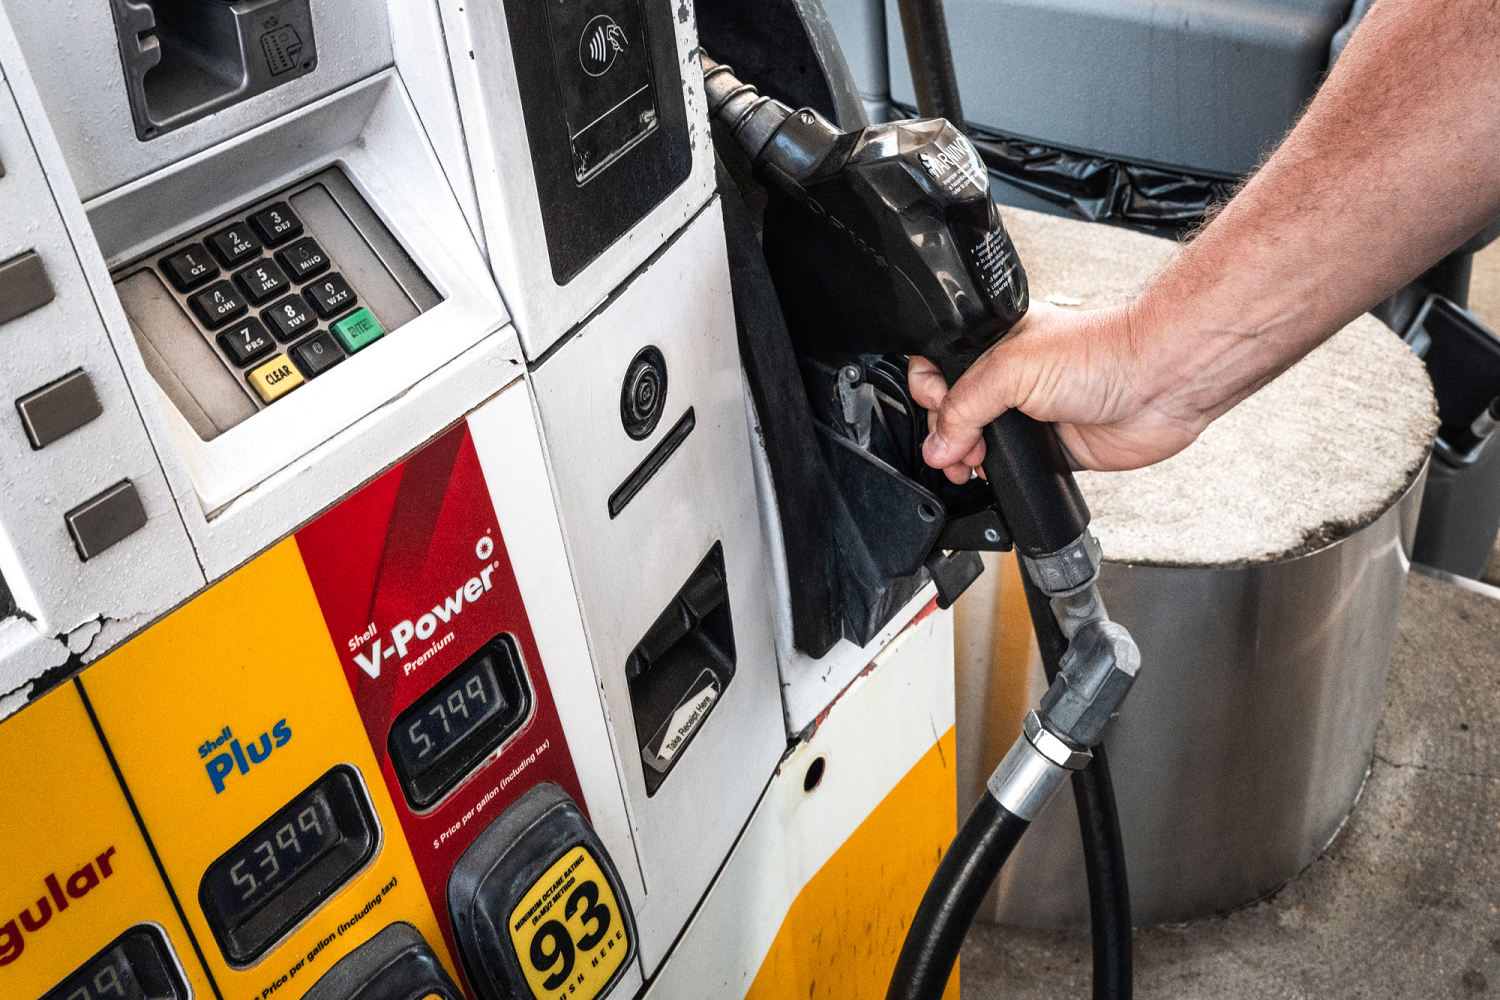 Gas is cheaper this July Fourth. Here’s how to stretch your dollar even further at the pump.